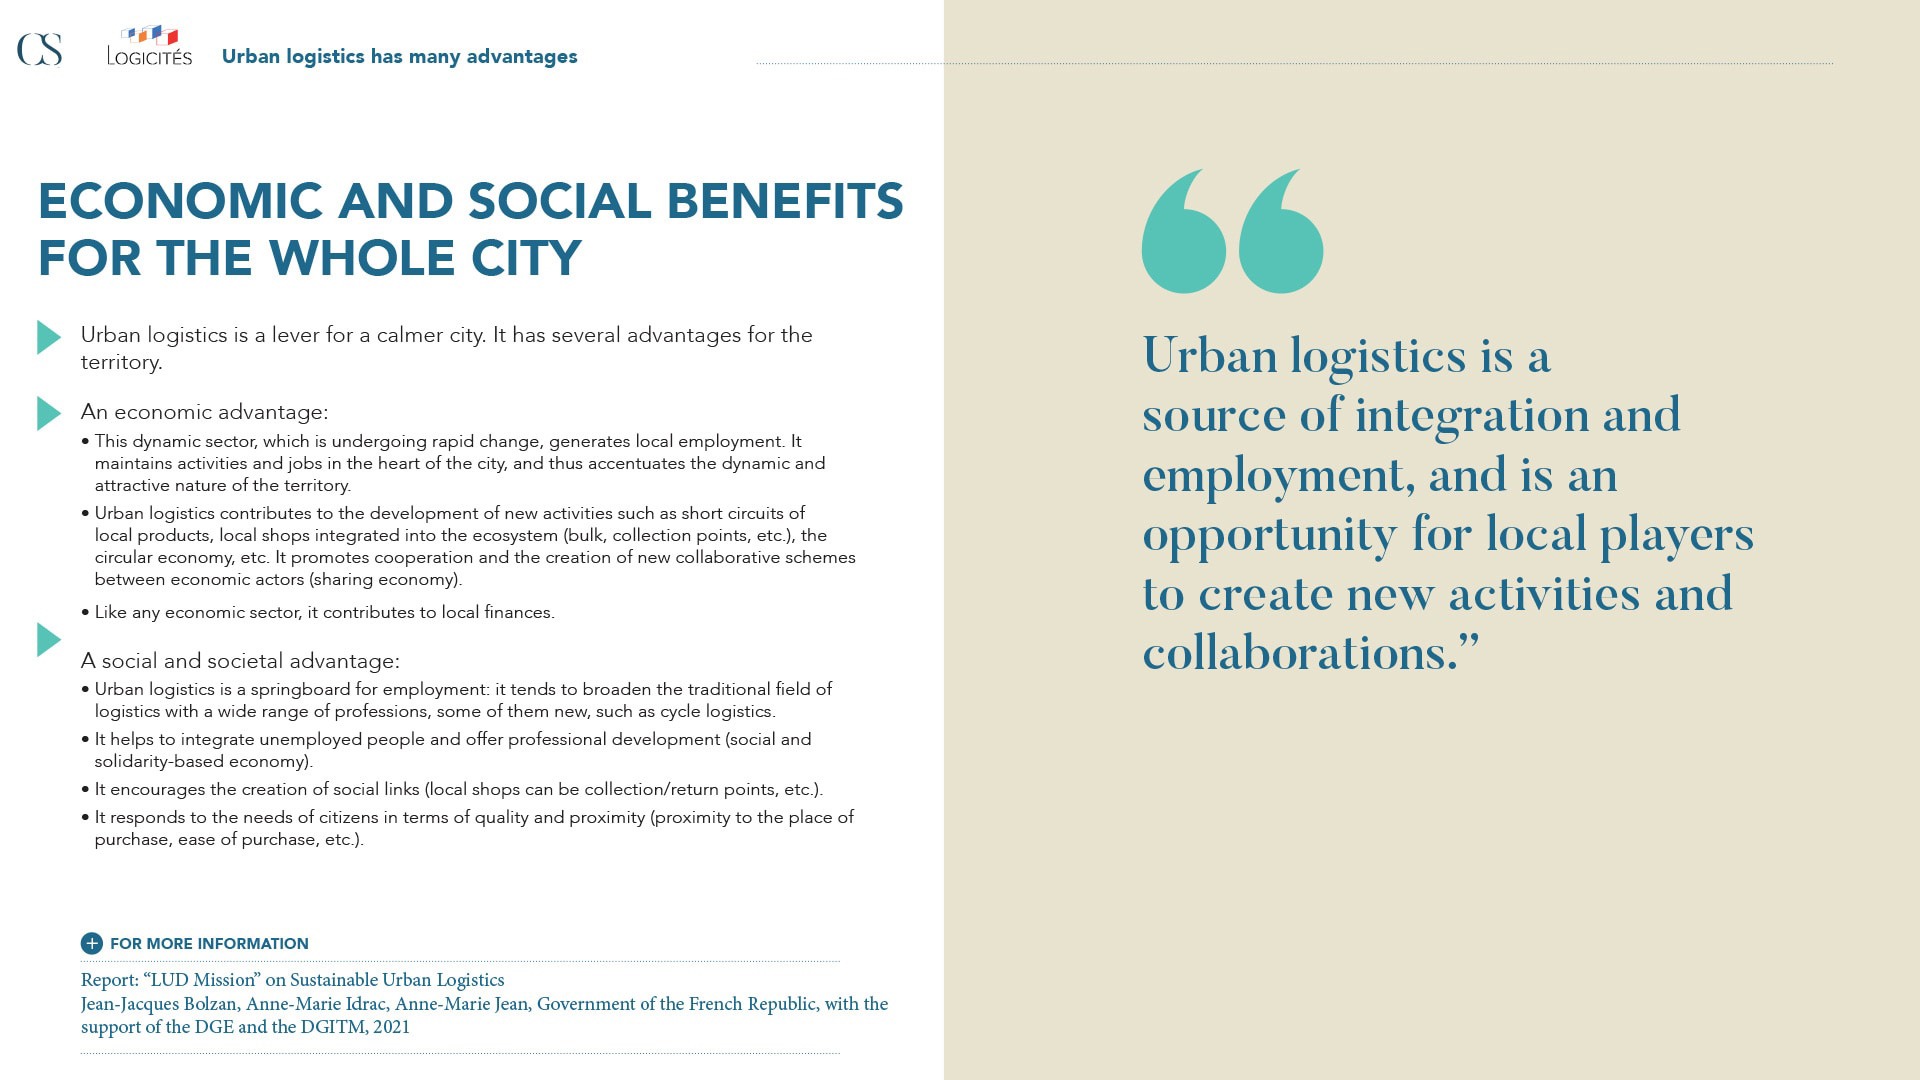 Economic and social benefits for the whole city